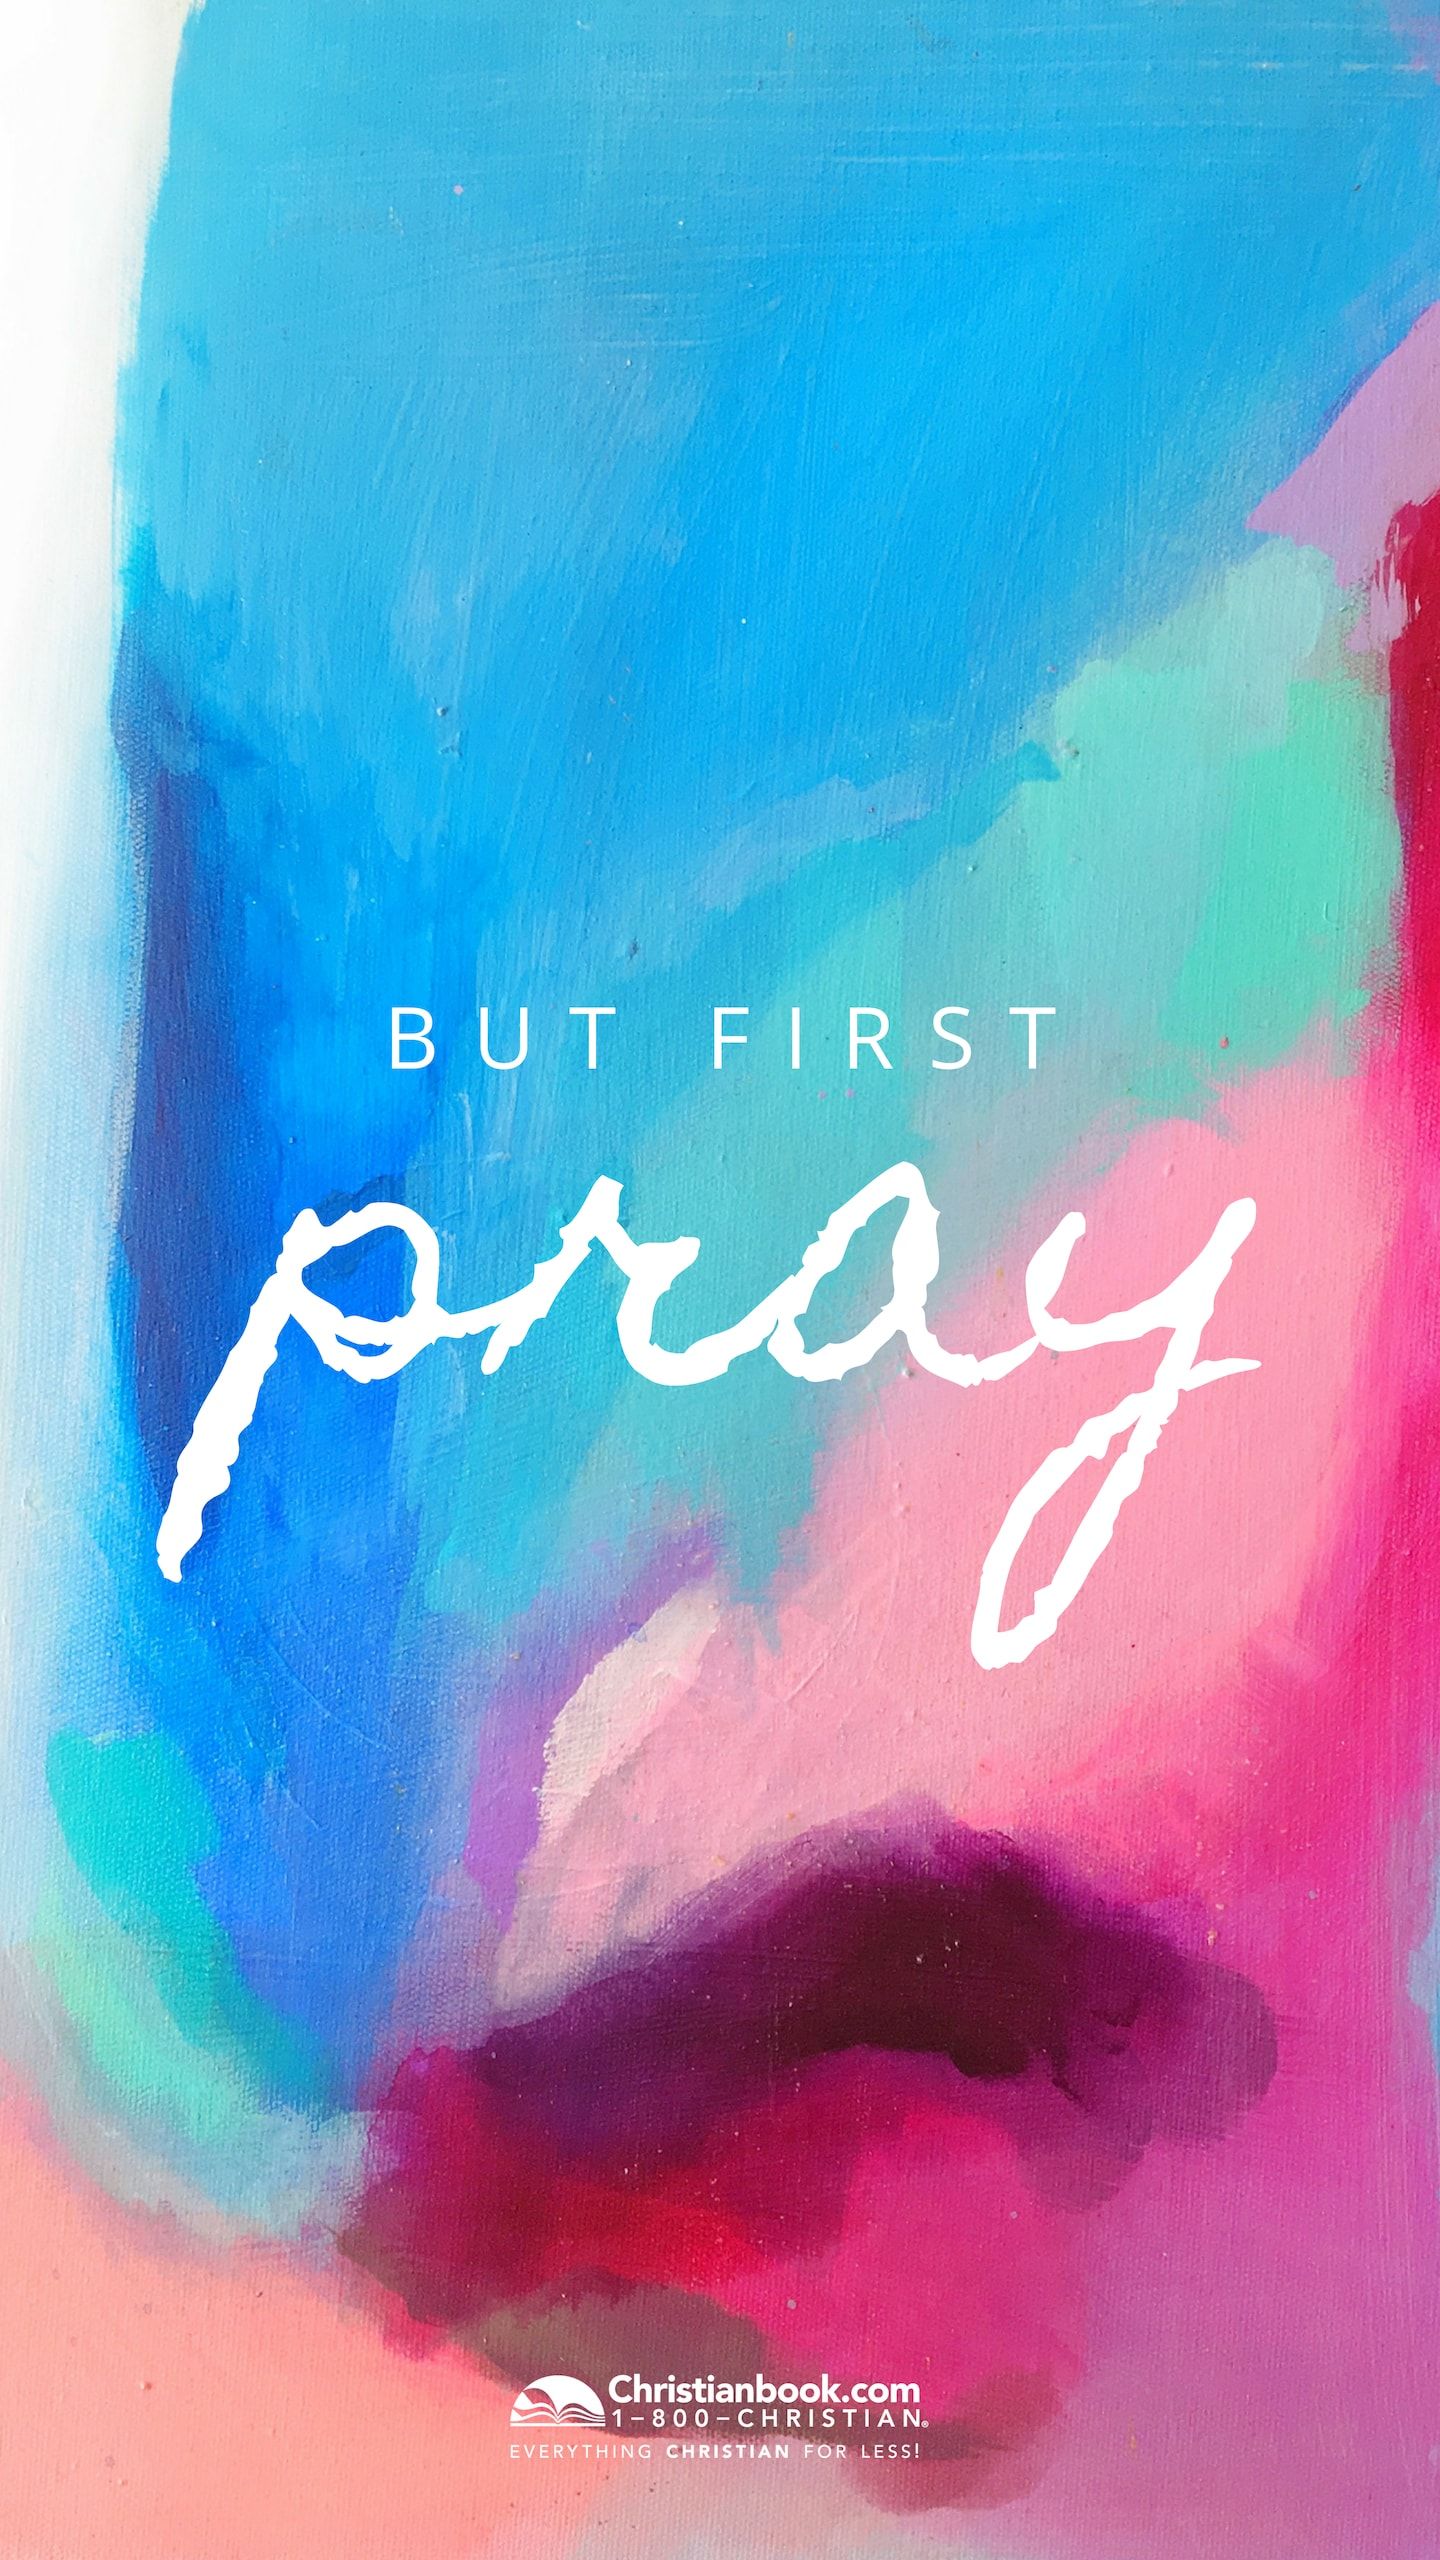 DOWNLOAD // Christian Wallpaper with Words of Faith.com Blog